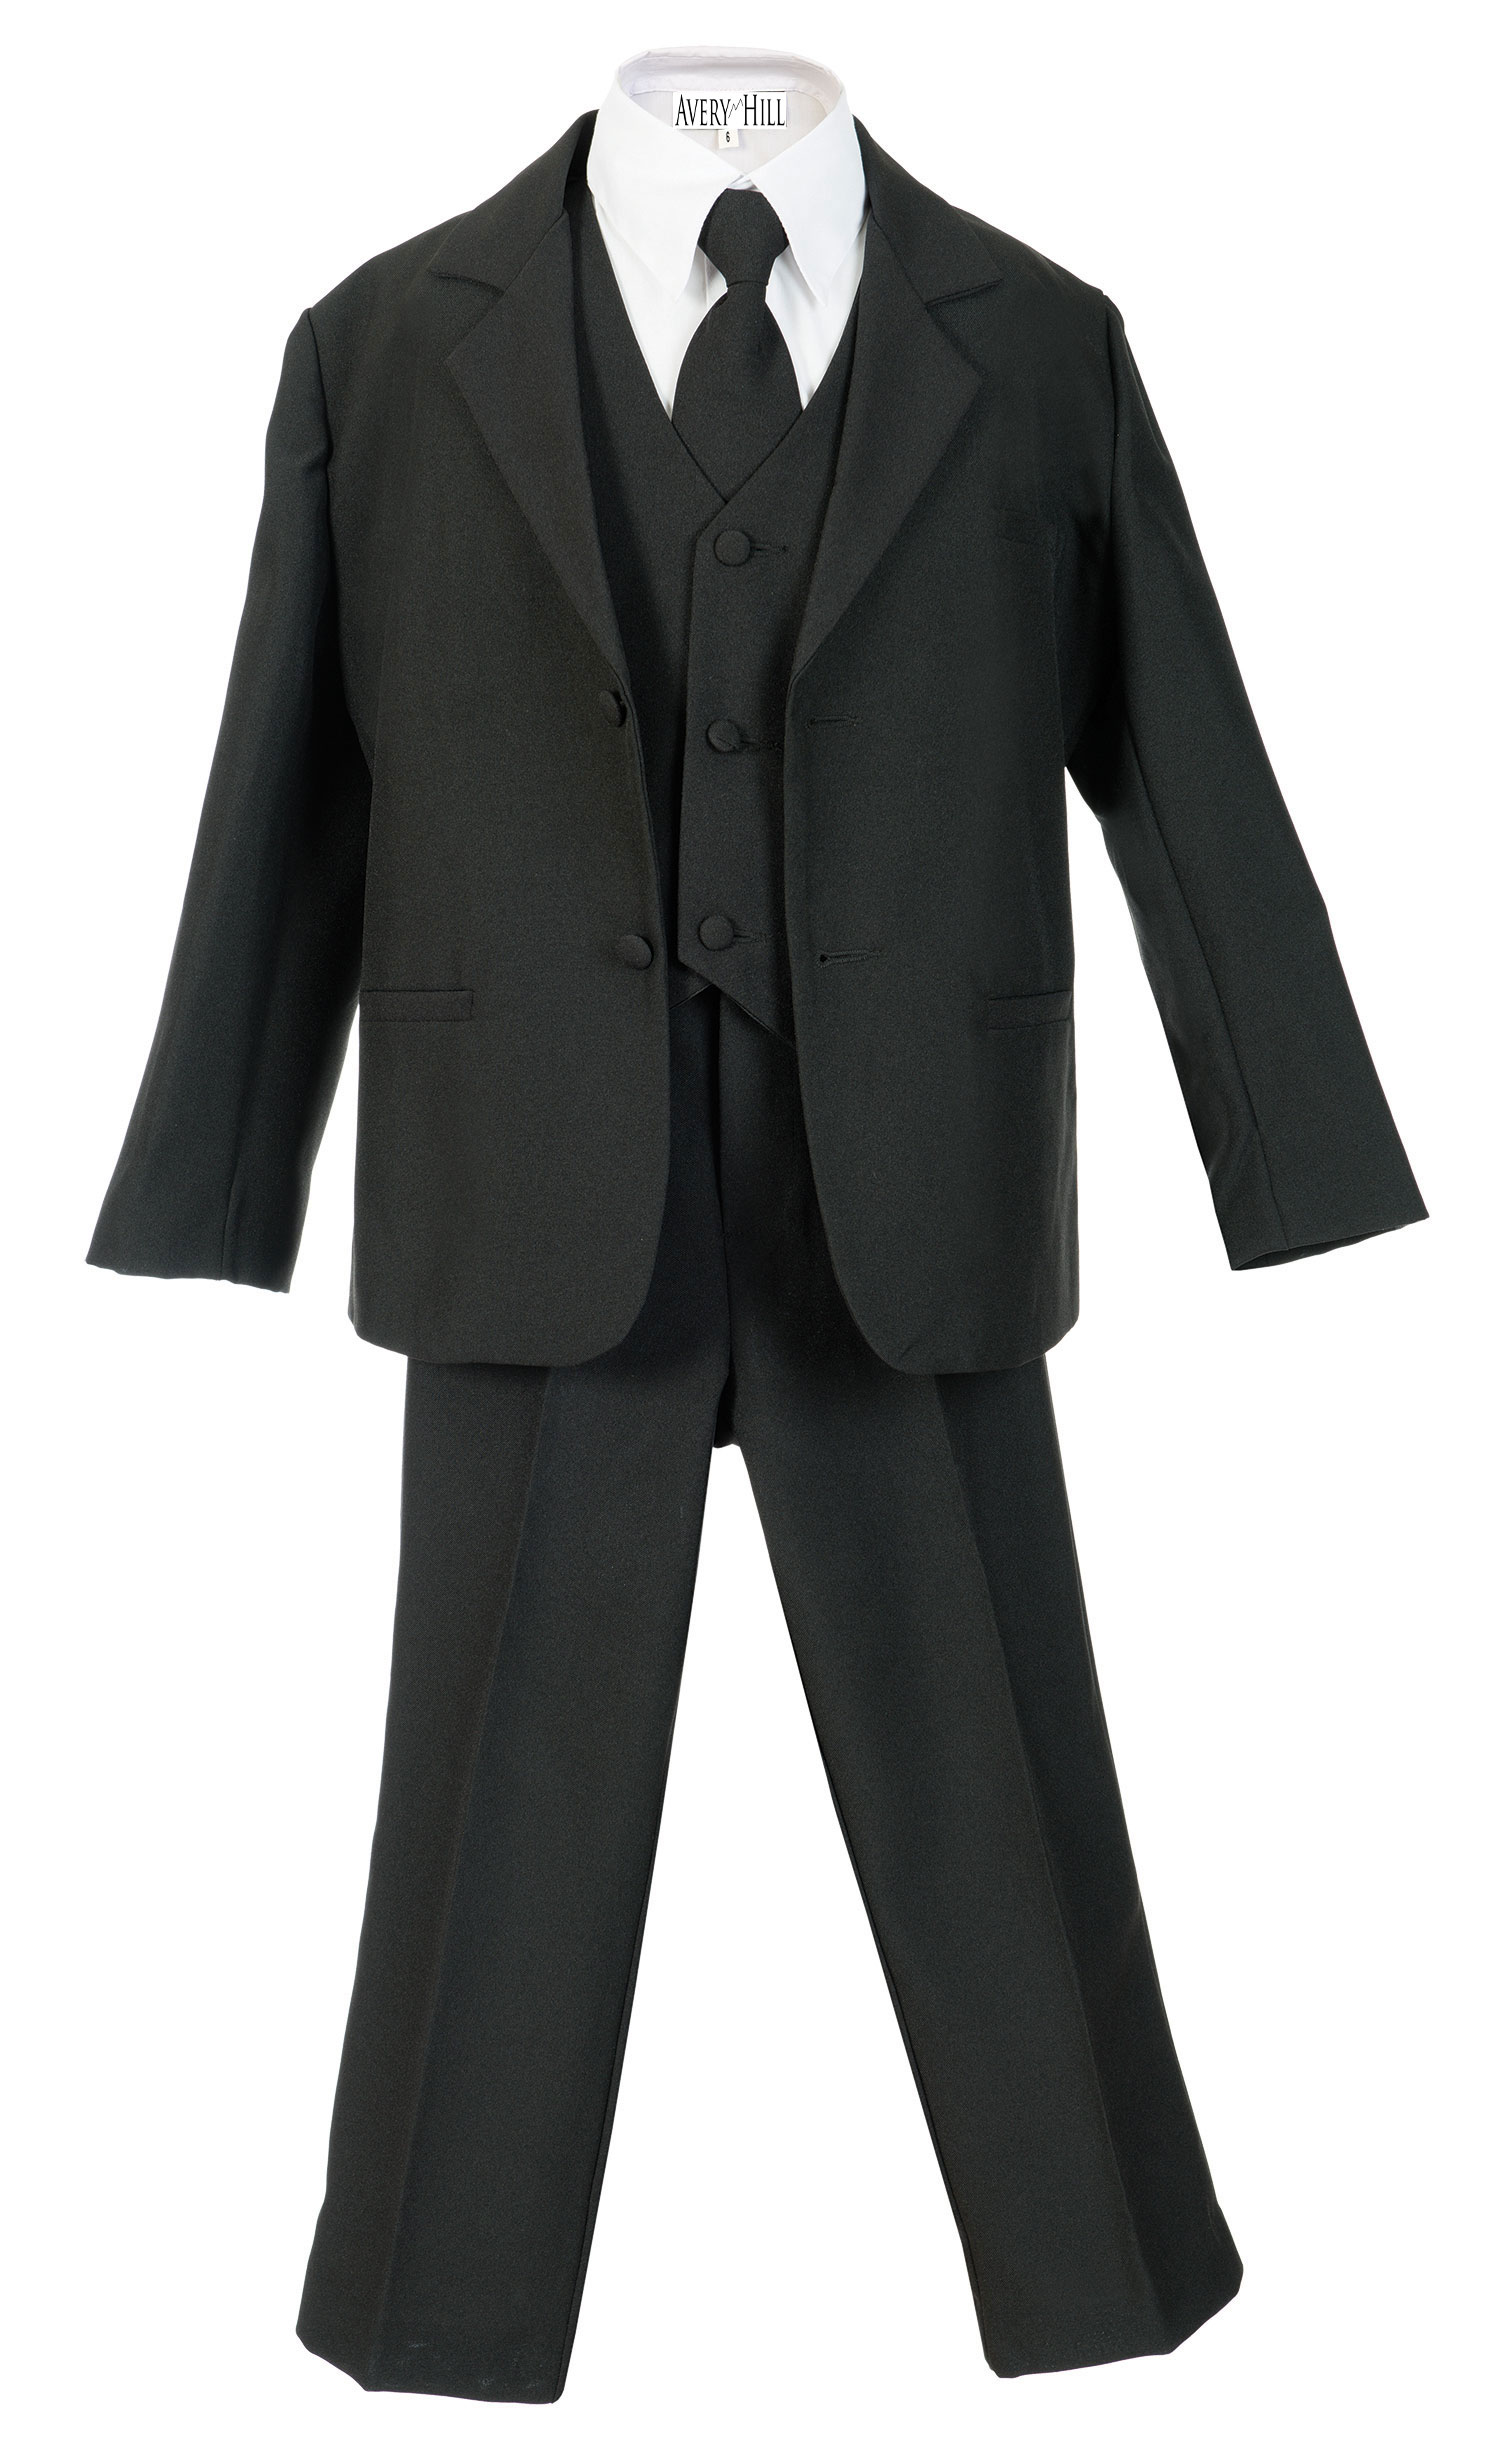 Avery Hill Boys Formal 5 Piece Suit with Shirt and Vest Black - 6